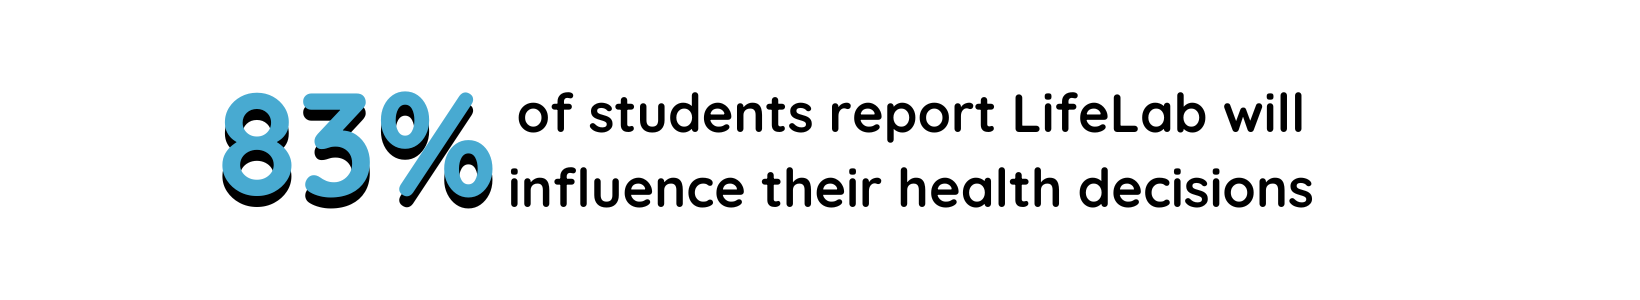 83% of students report LifeLab will influence their health decisions